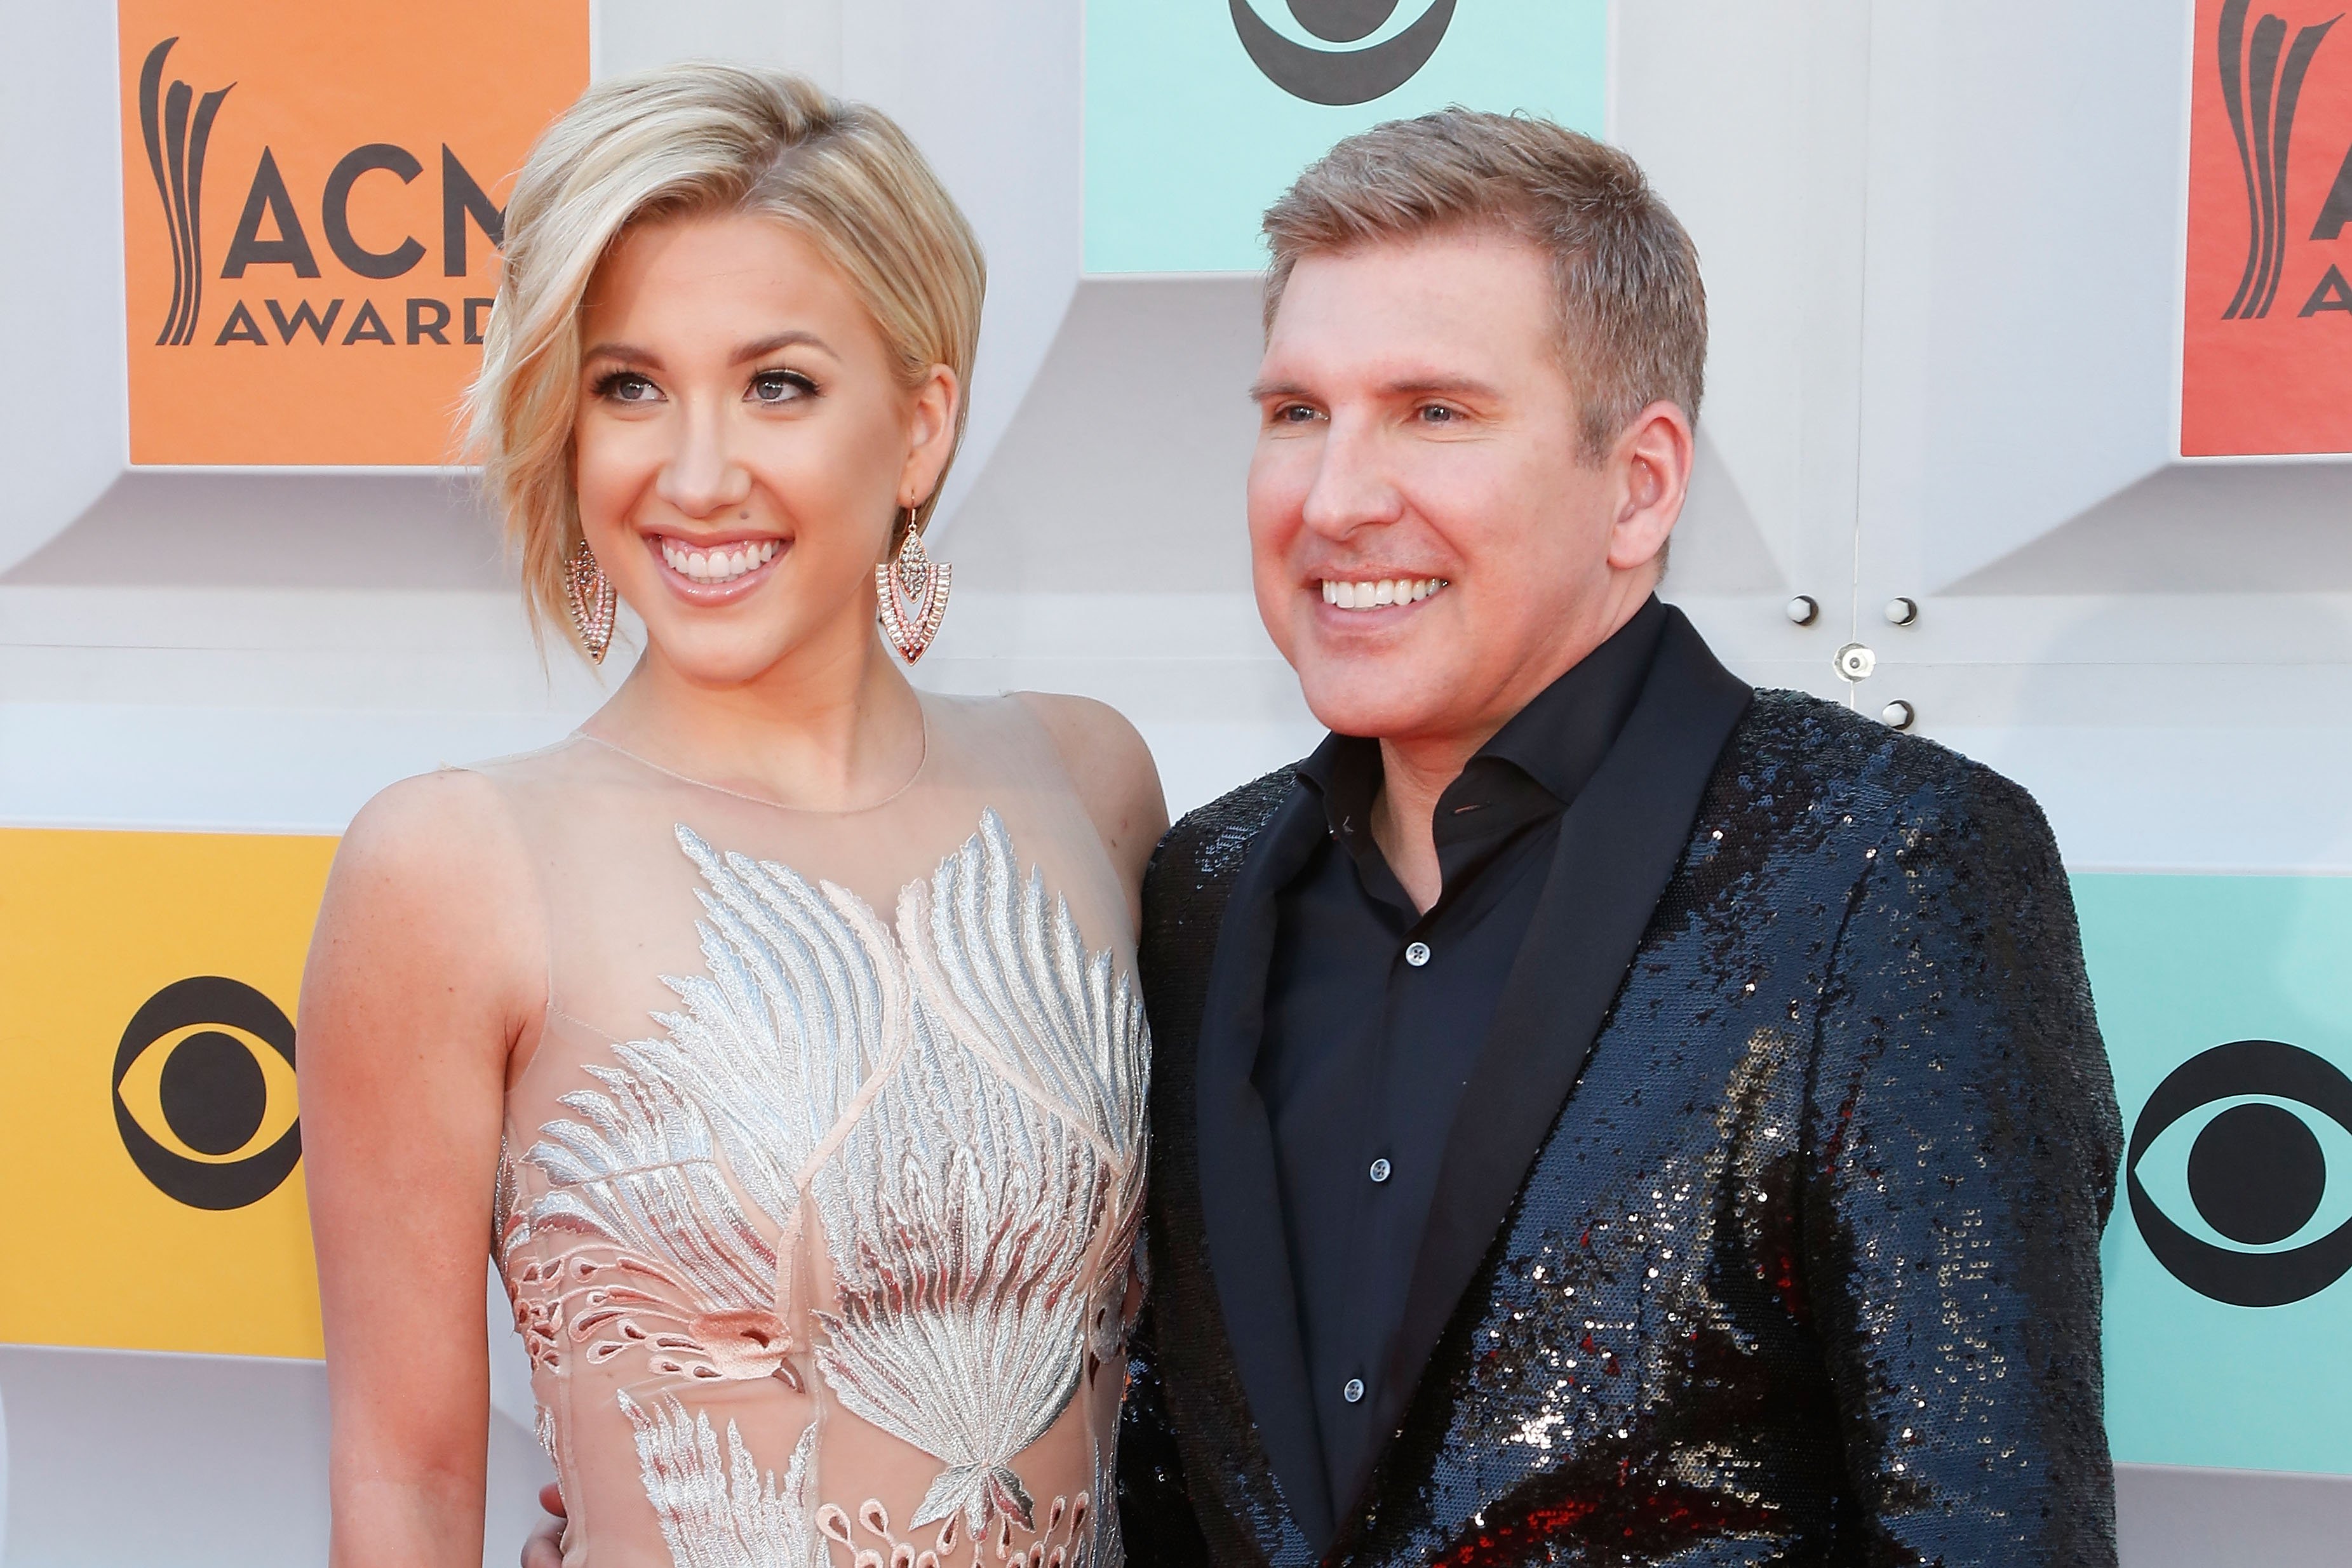 Savannah Chrisley and Todd Chrisley attend the Academy of Country Music Awards in Las Vegas, Nevada on April 3, 2016 | Photo: Getty Images